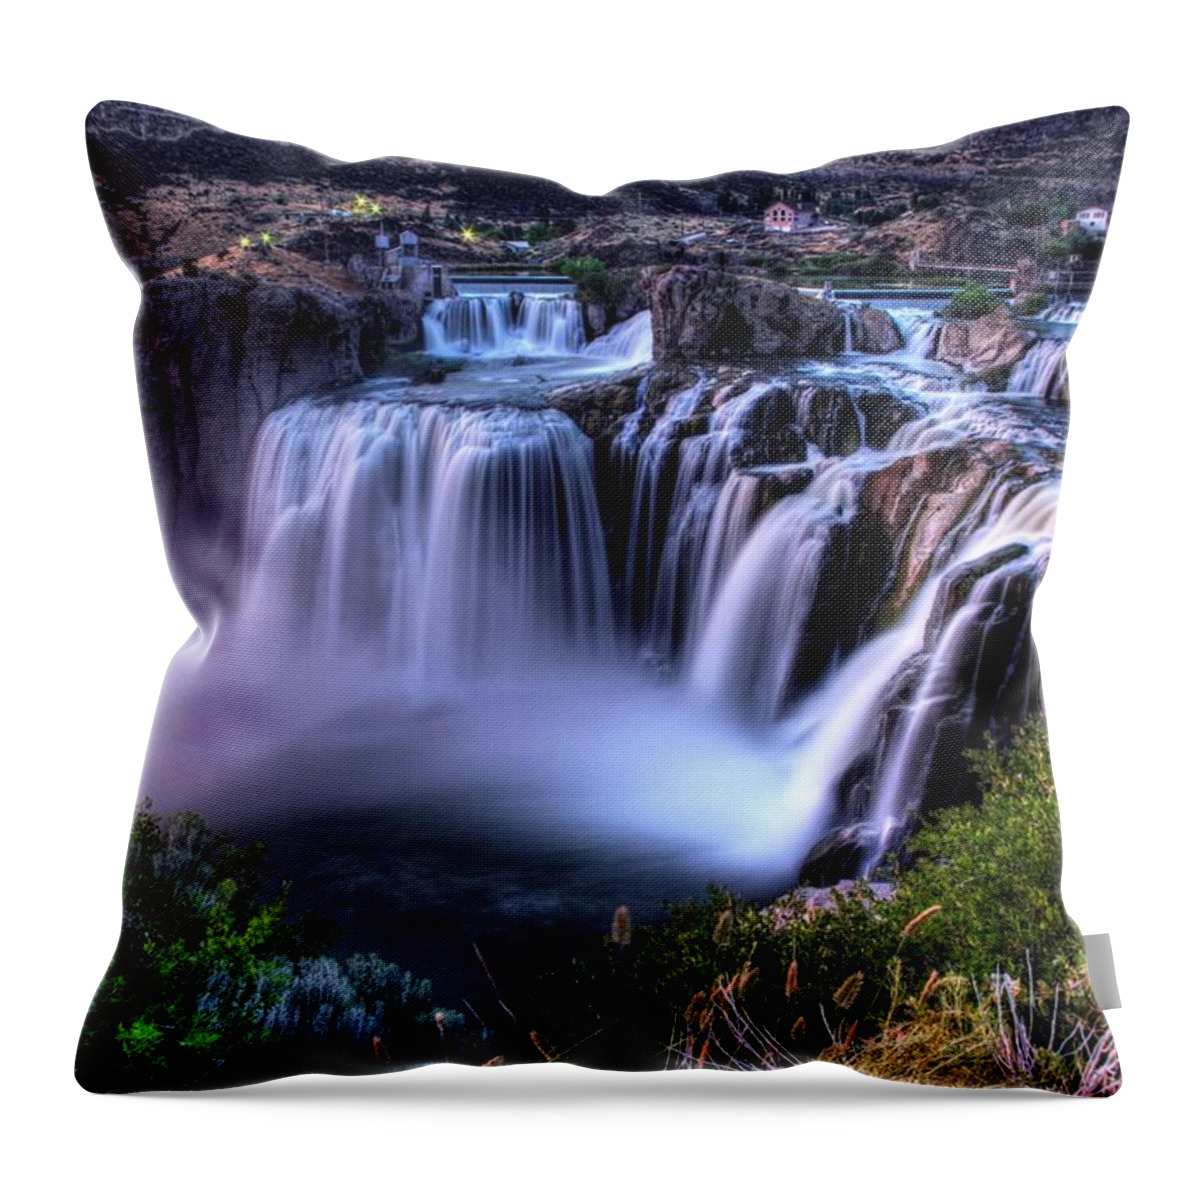 Waterfall Throw Pillow featuring the photograph Shoshone Falls by David Andersen